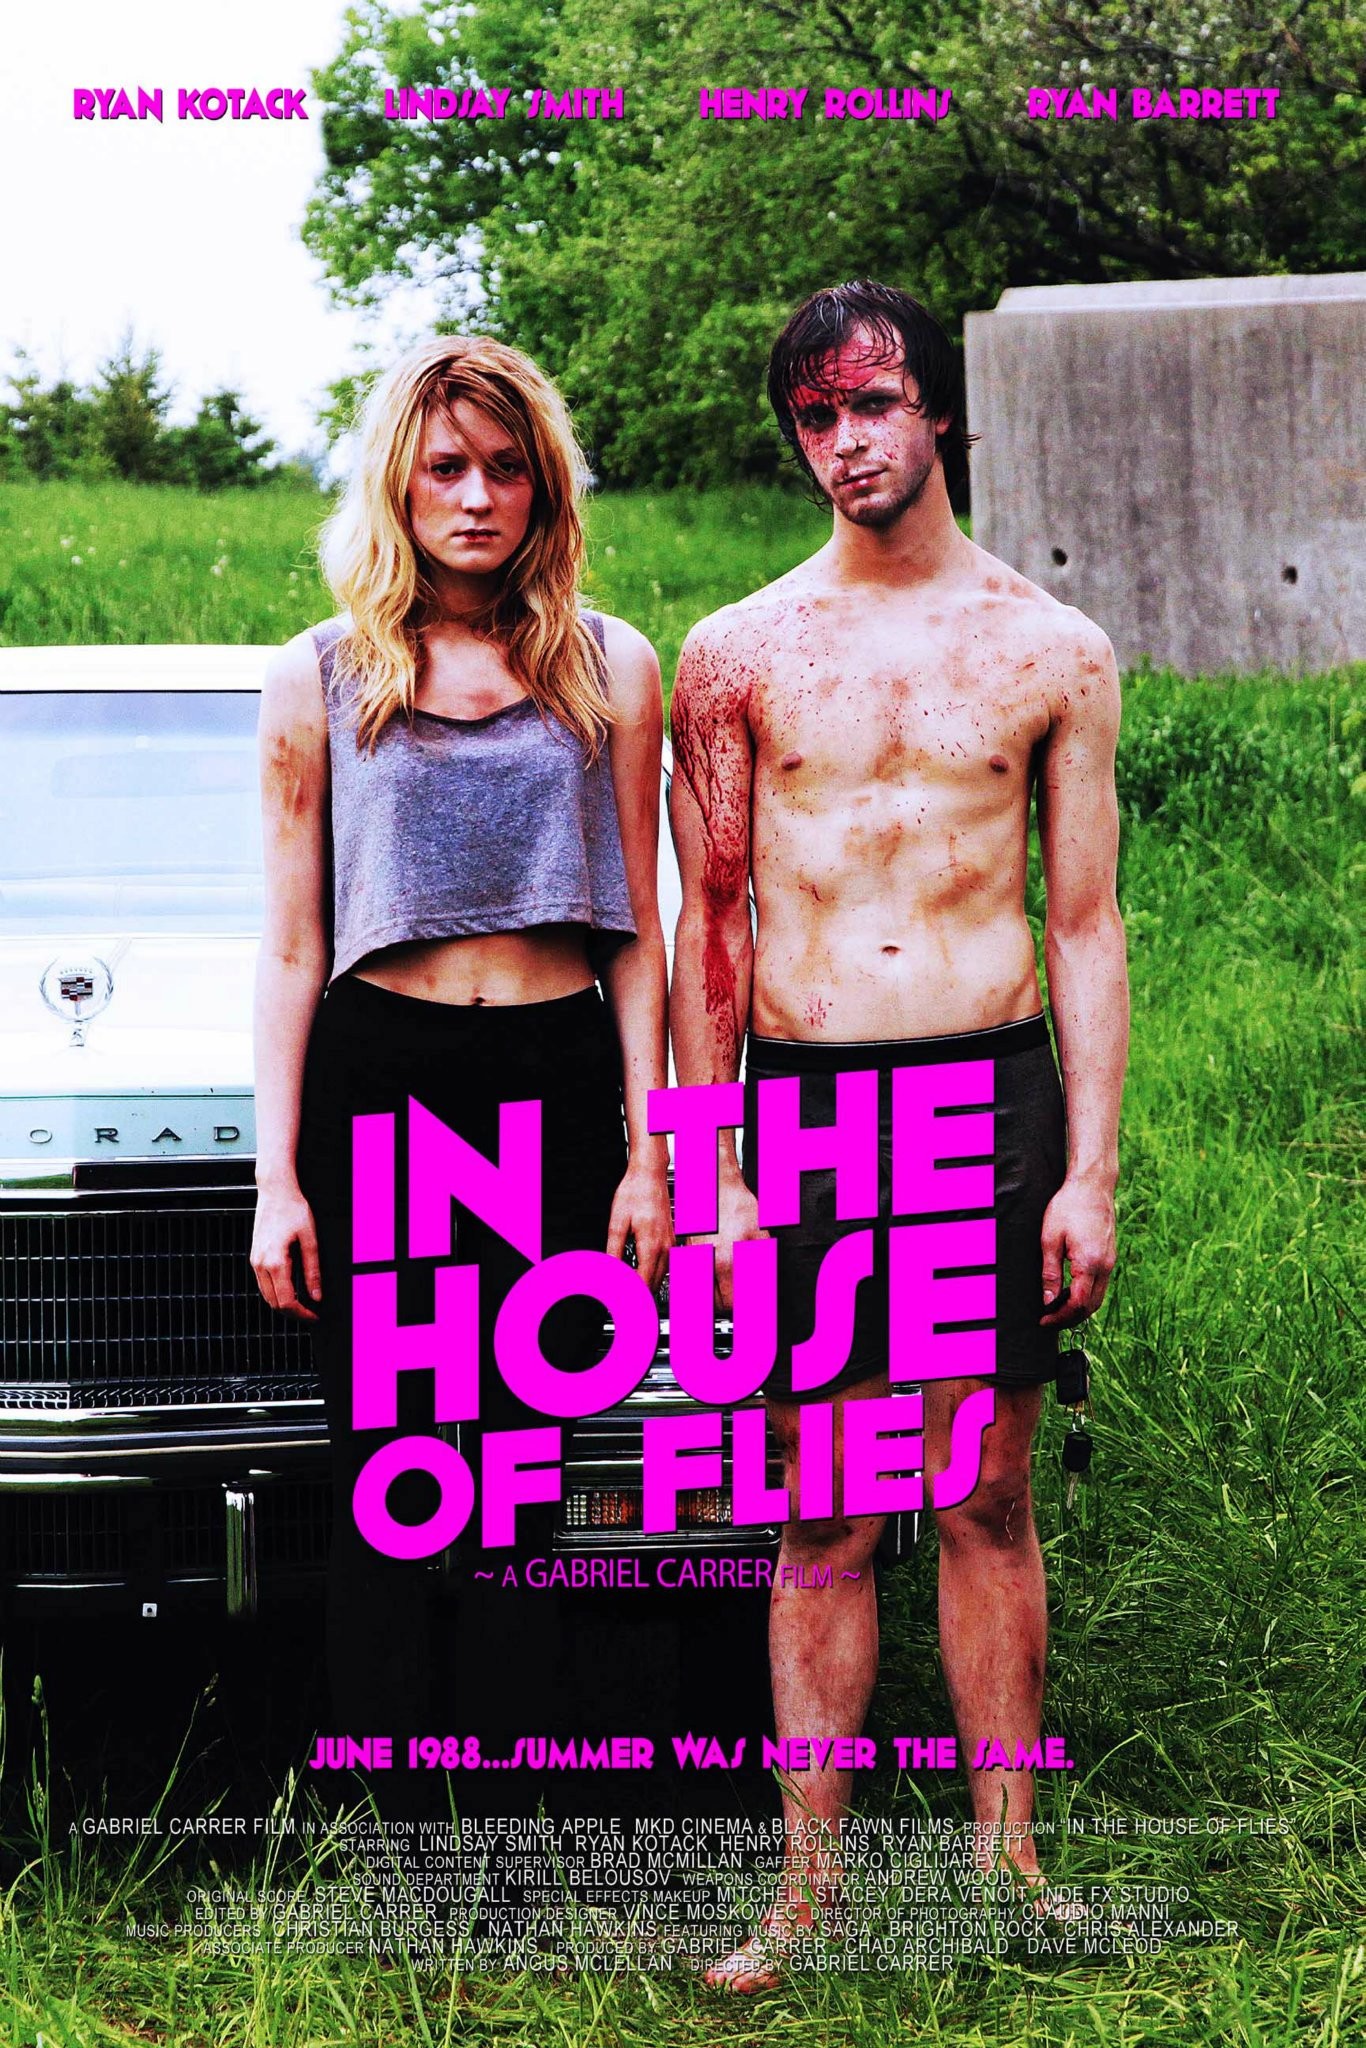 Mega Sized Movie Poster Image for In the House of Flies (#1 of 2)